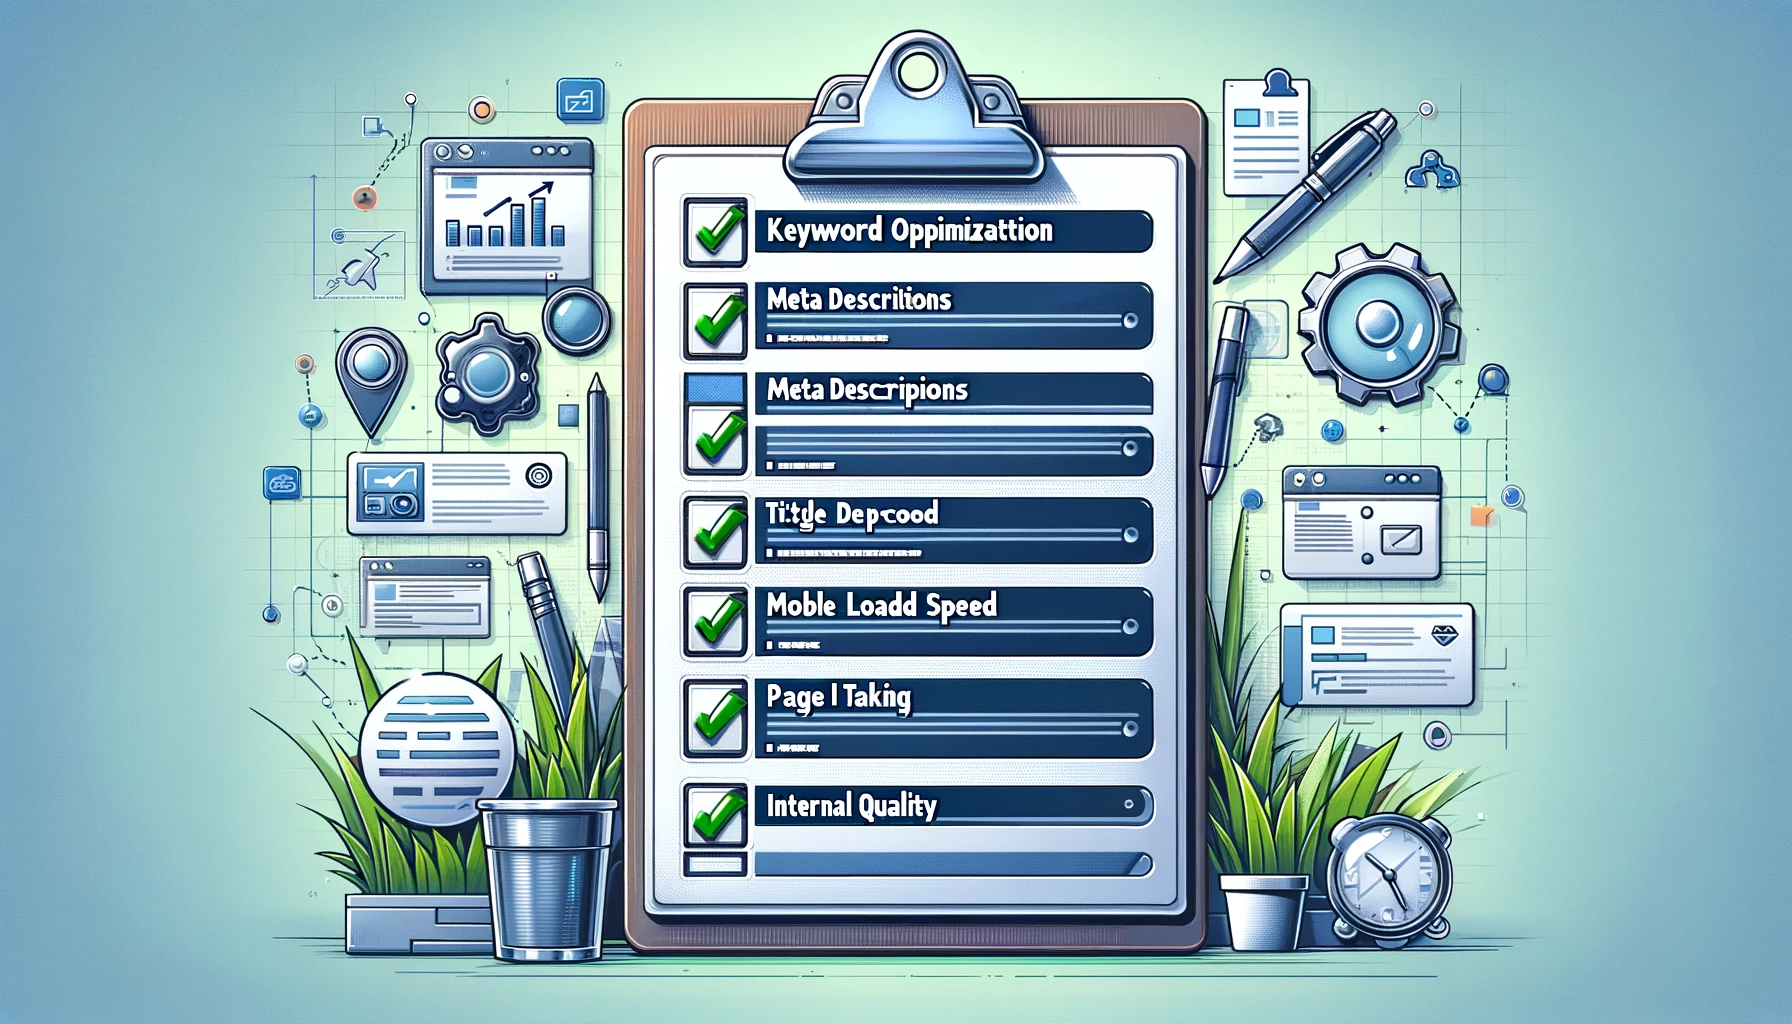 A detailed illustration showing an 'On-Page SEO Checklist'. The image features a large checklist on a clipboard, with items like 'Keyword Optimization